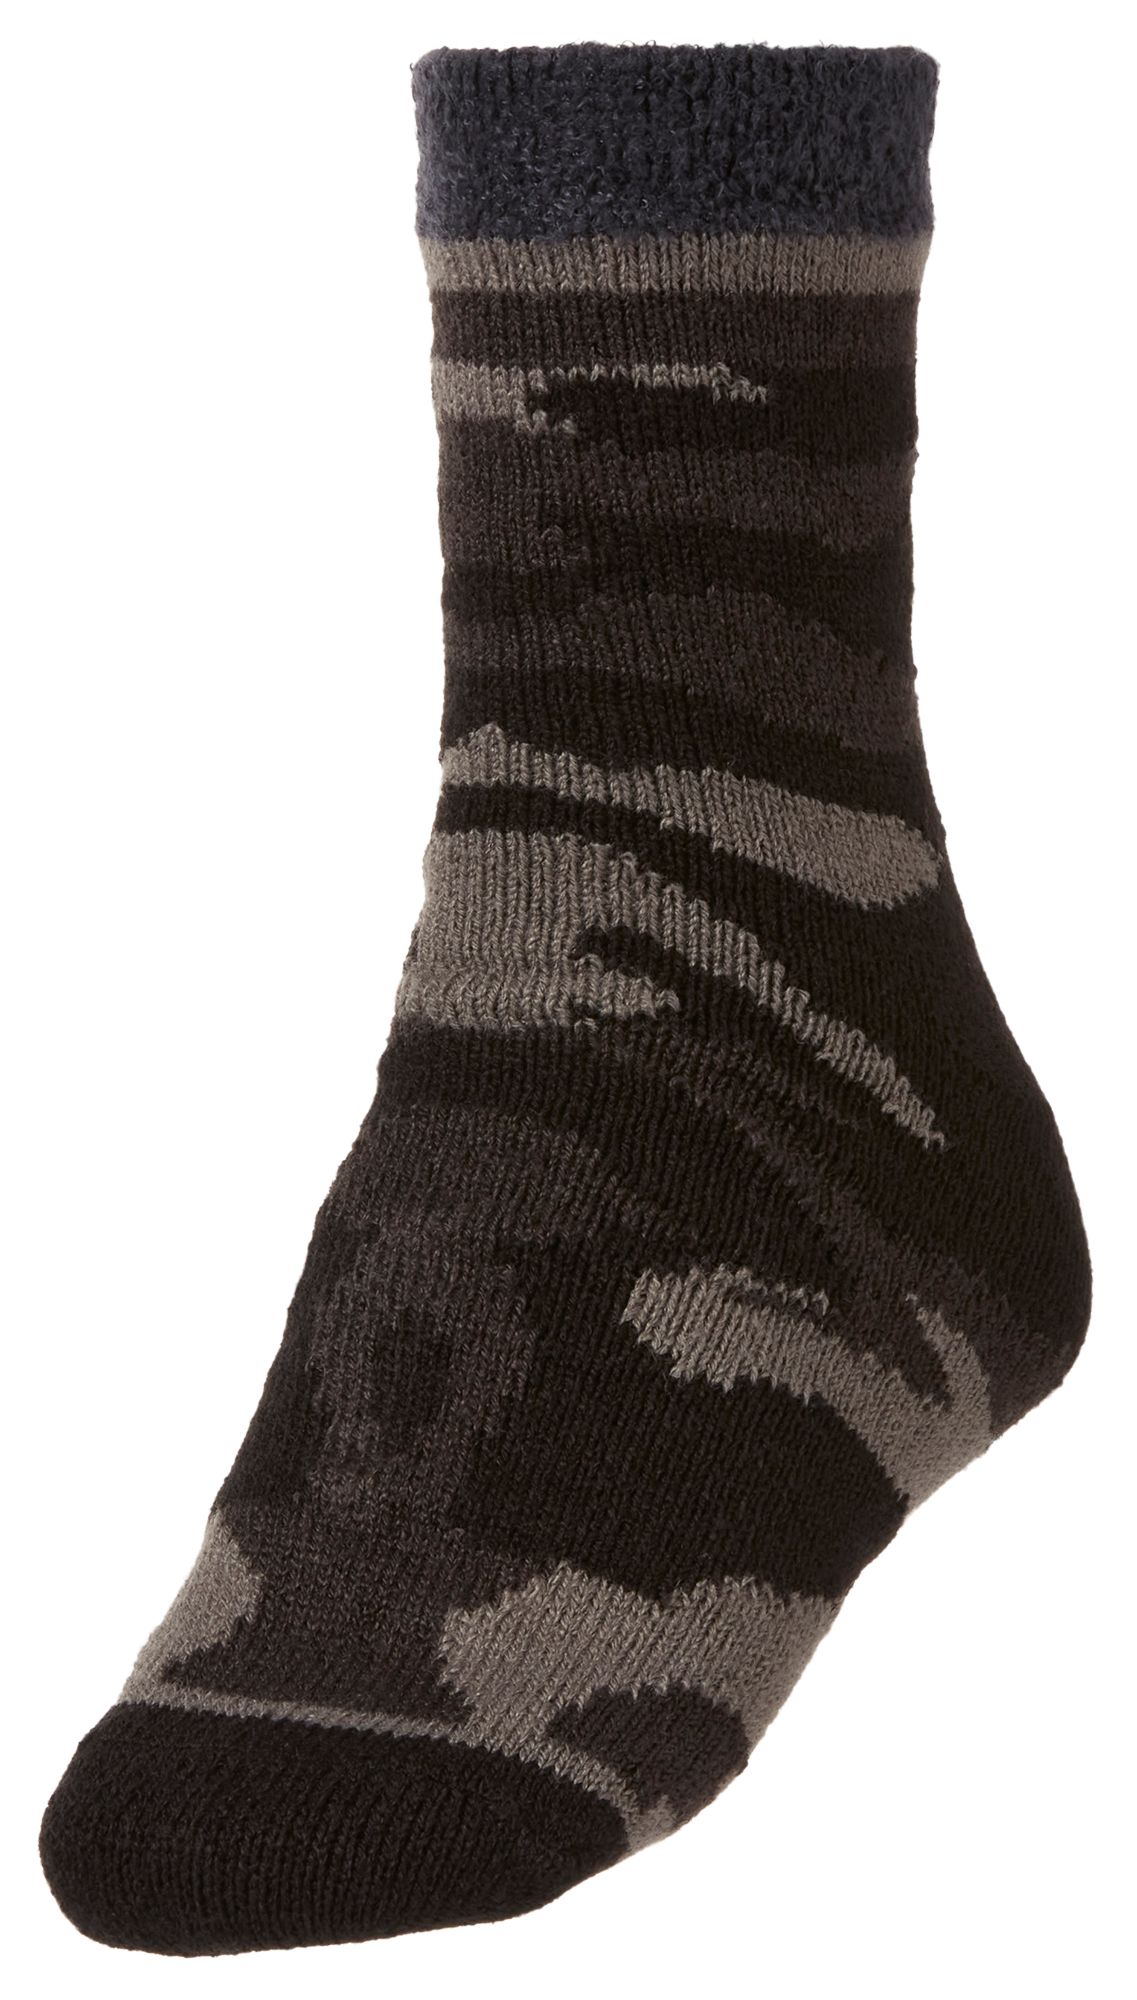 Northeast Outfitters Mens Camo Cozy Cabin Socks